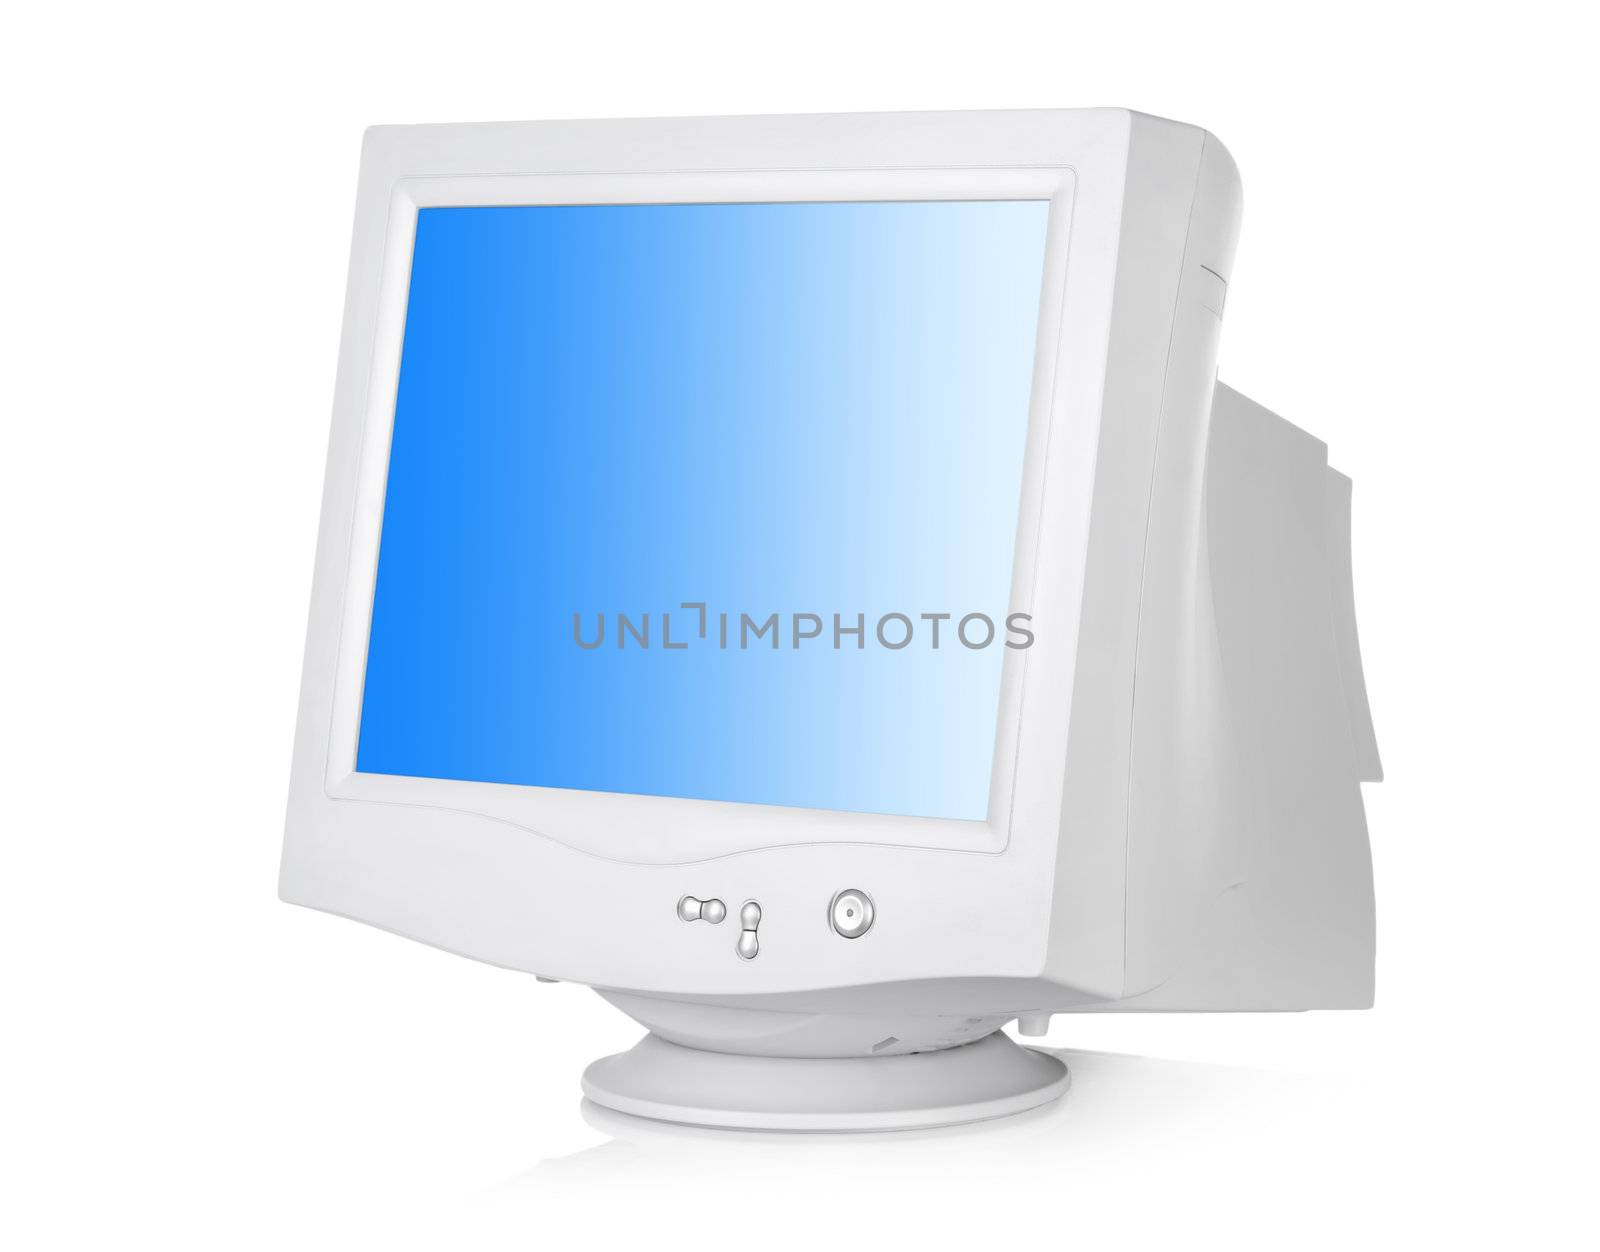 CRT monitor by Givaga